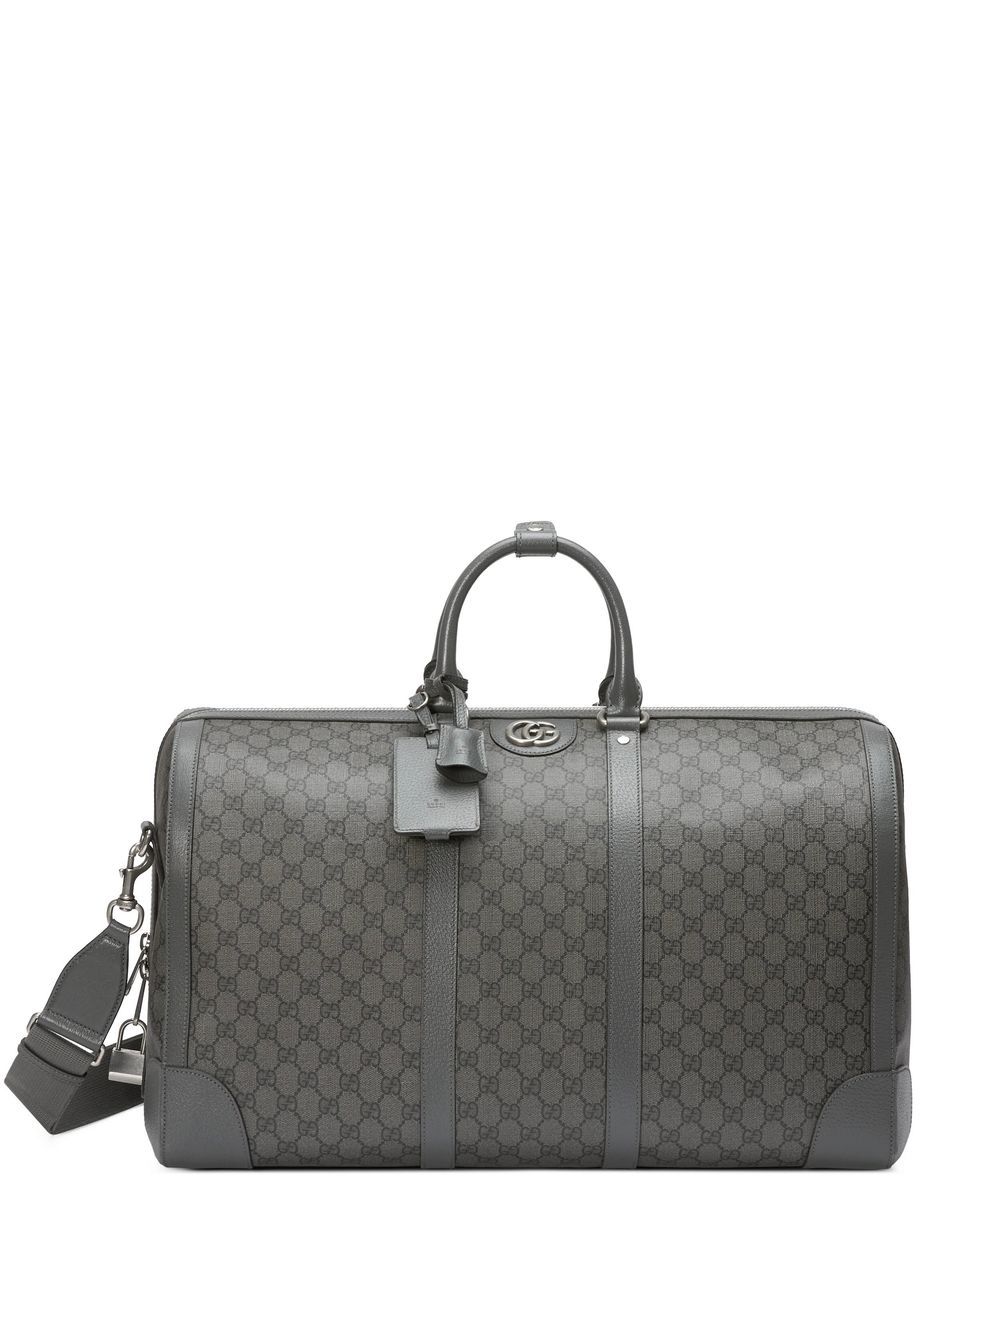 Gucci Large Ophidia Duffle Bag In Grey